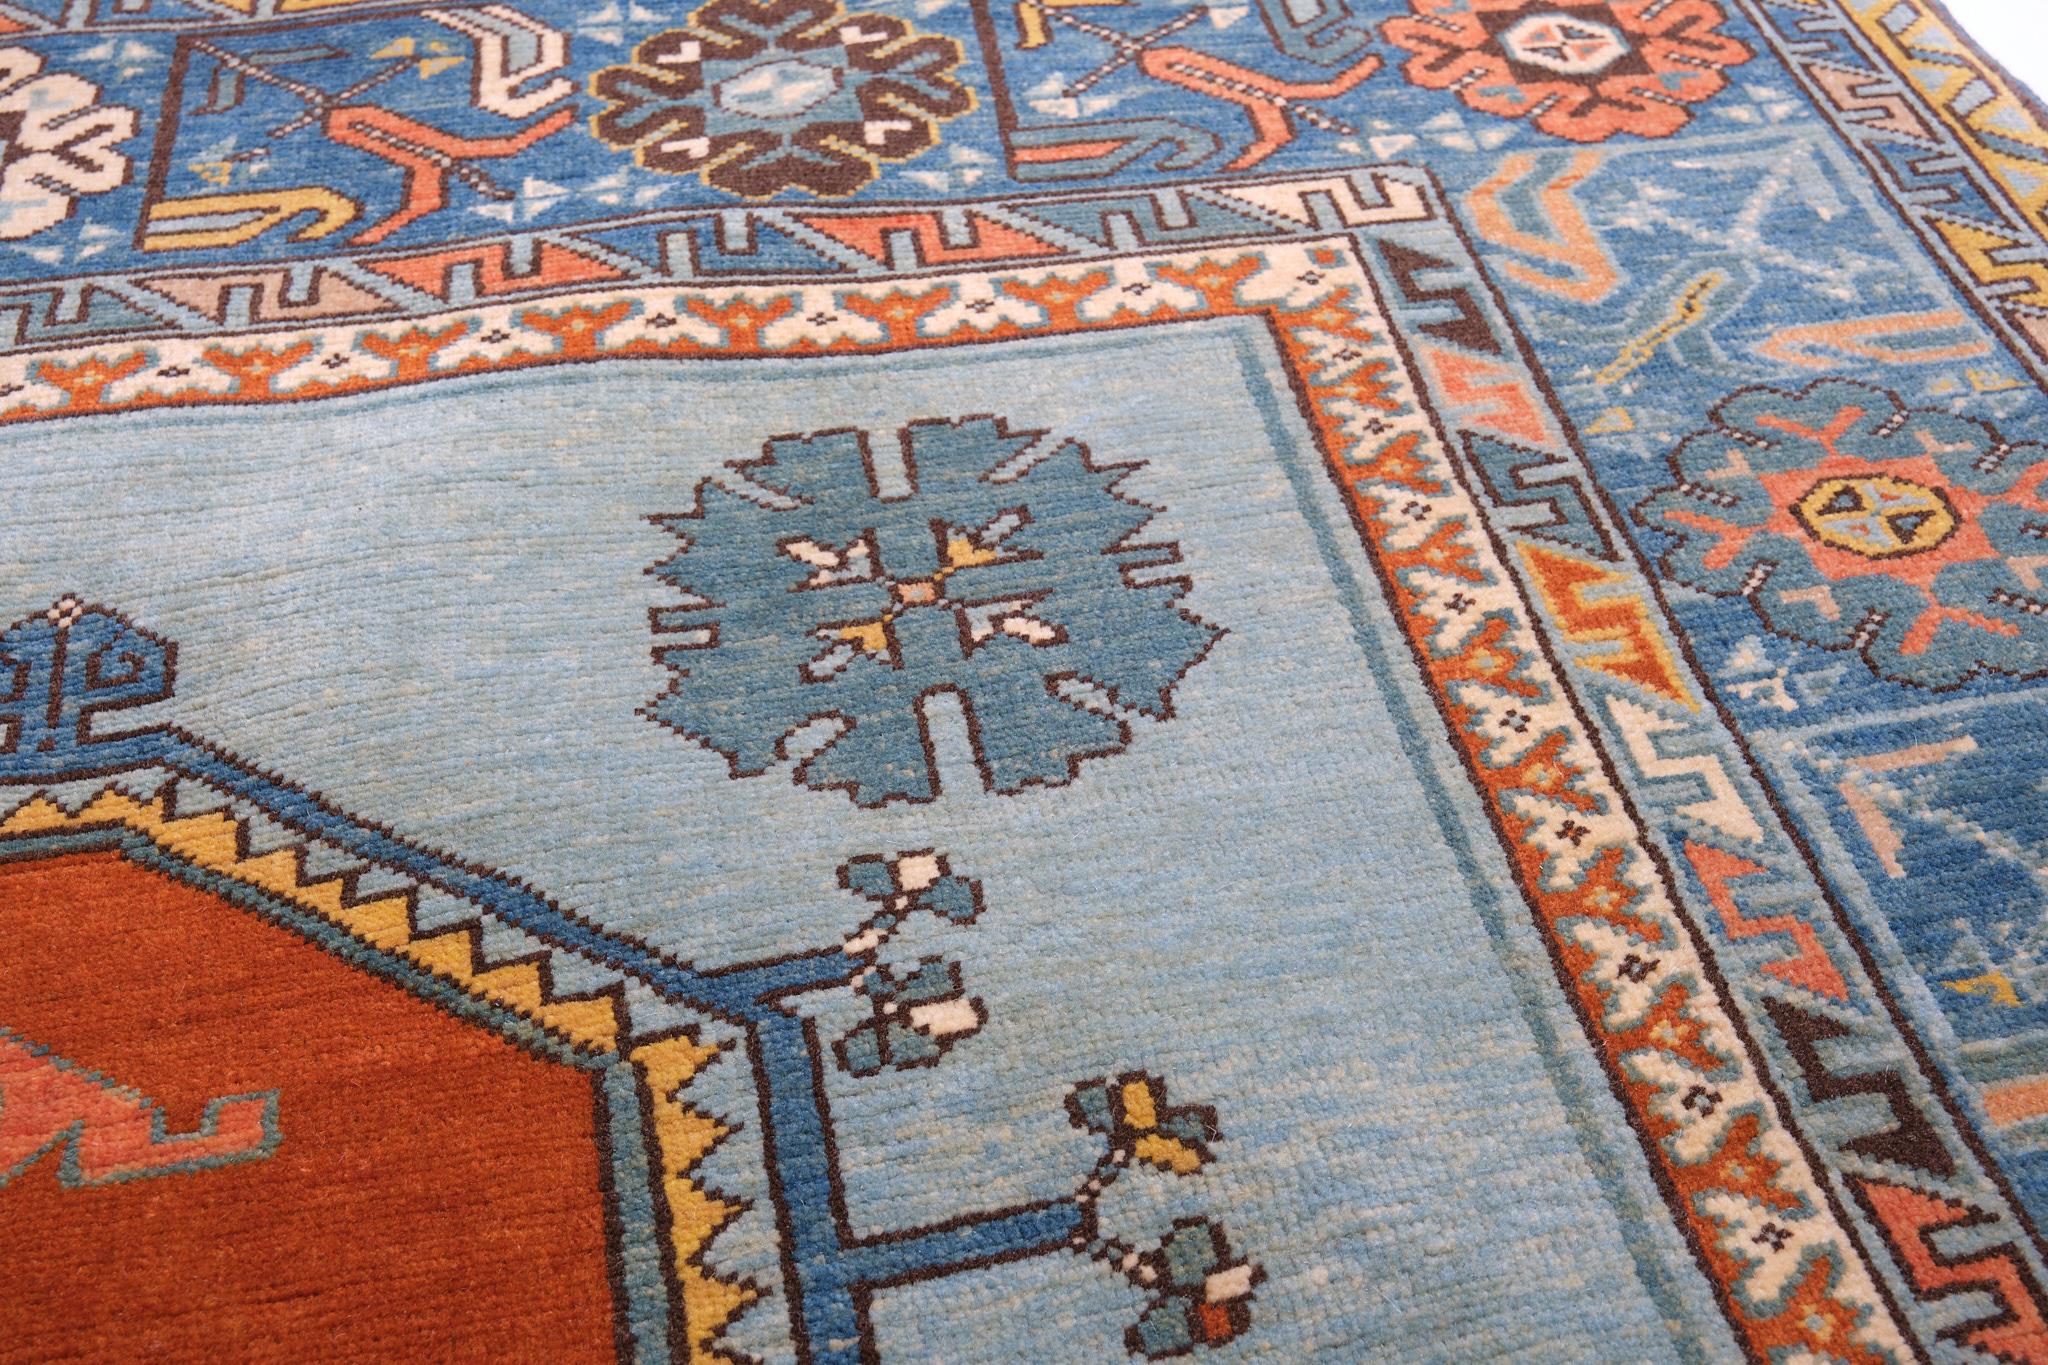 Turkish Ararat Rugs Carpet with Two Medallions 18th Century Revival Rug Natural Dyed For Sale